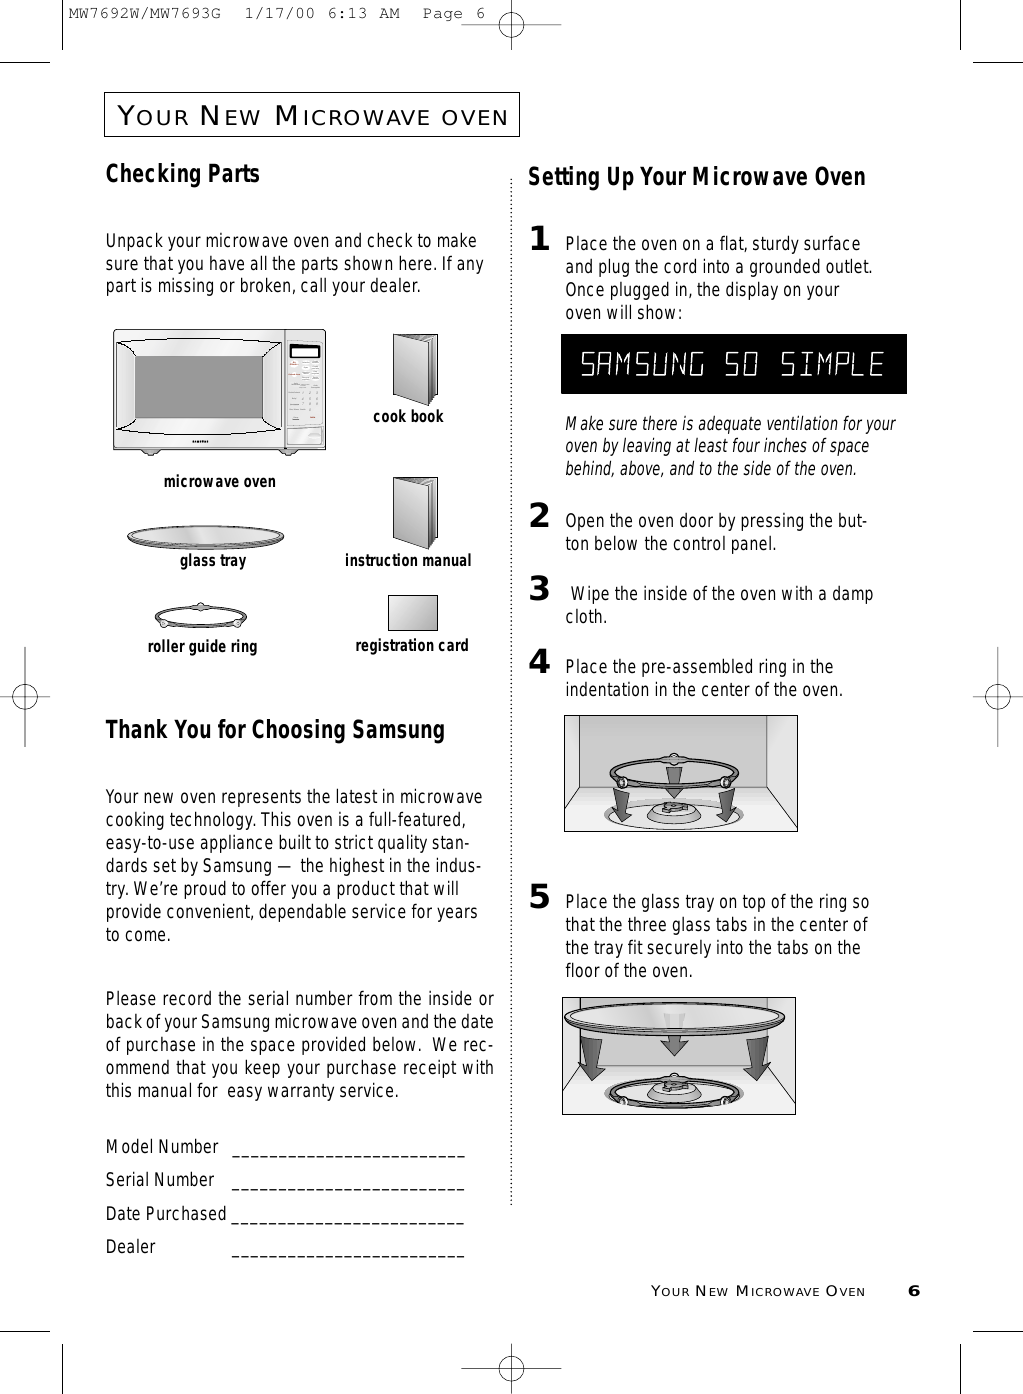 YOURNEWMICROWAVE OVEN6YOURNEWMICROWAVEOVENChecking PartsUnpack your microwave oven and check to makesure that you have all the parts shown here. If anypart is missing or broken, call your dealer.Thank You for Choosing SamsungYour new oven represents the latest in microwavecooking technology. This oven is a full-featured,easy-to-use appliance built to strict quality stan-dards set by Samsung — the highest in the indus-try. We’re proud to offer you a product that willprovide convenient, dependable service for yearsto come. Please record the serial number from the inside orback of your Samsung microwave oven and the dateof purchase in the space provided below.  We rec-ommend that you keep your purchase receipt withthis manual for  easy warranty service. Model Number   _________________________Serial Number _________________________Date Purchased _________________________Dealer _________________________Setting Up Your Microwave Oven1Place the oven on a flat, sturdy surfaceand plug the cord into a grounded outlet.Once plugged in, the display on youroven will show:Make sure there is adequate ventilation for youroven by leaving at least four inches of spacebehind, above, and to the side of the oven. 2Open the oven door by pressing the but-ton below the control panel.3Wipe the inside of the oven with a dampcloth.4Place the pre-assembled ring in theindentation in the center of the oven.5Place the glass tray on top of the ring sothat the three glass tabs in the center ofthe tray fit securely into the tabs on thefloor of the oven.3216549870AutoRecalentadoAutoDescongeladoInicio PausaCancelarRelojMas / MenosNivel de PotenciaUnMinuto +Cocinado SuavePapasPalomitas ComidadieteticaComidapara bebeVegetalesfrescosDesayunocongeladoCenacongeladaRecetapersonalizada1.Plato de comida2.Guisado3.Sopa / salsaSonidomicrowave ovenglass trayroller guide ringinstruction manualcook bookregistration cardMICRO HELPMW7692W/MW7693G  1/17/00 6:13 AM  Page 6